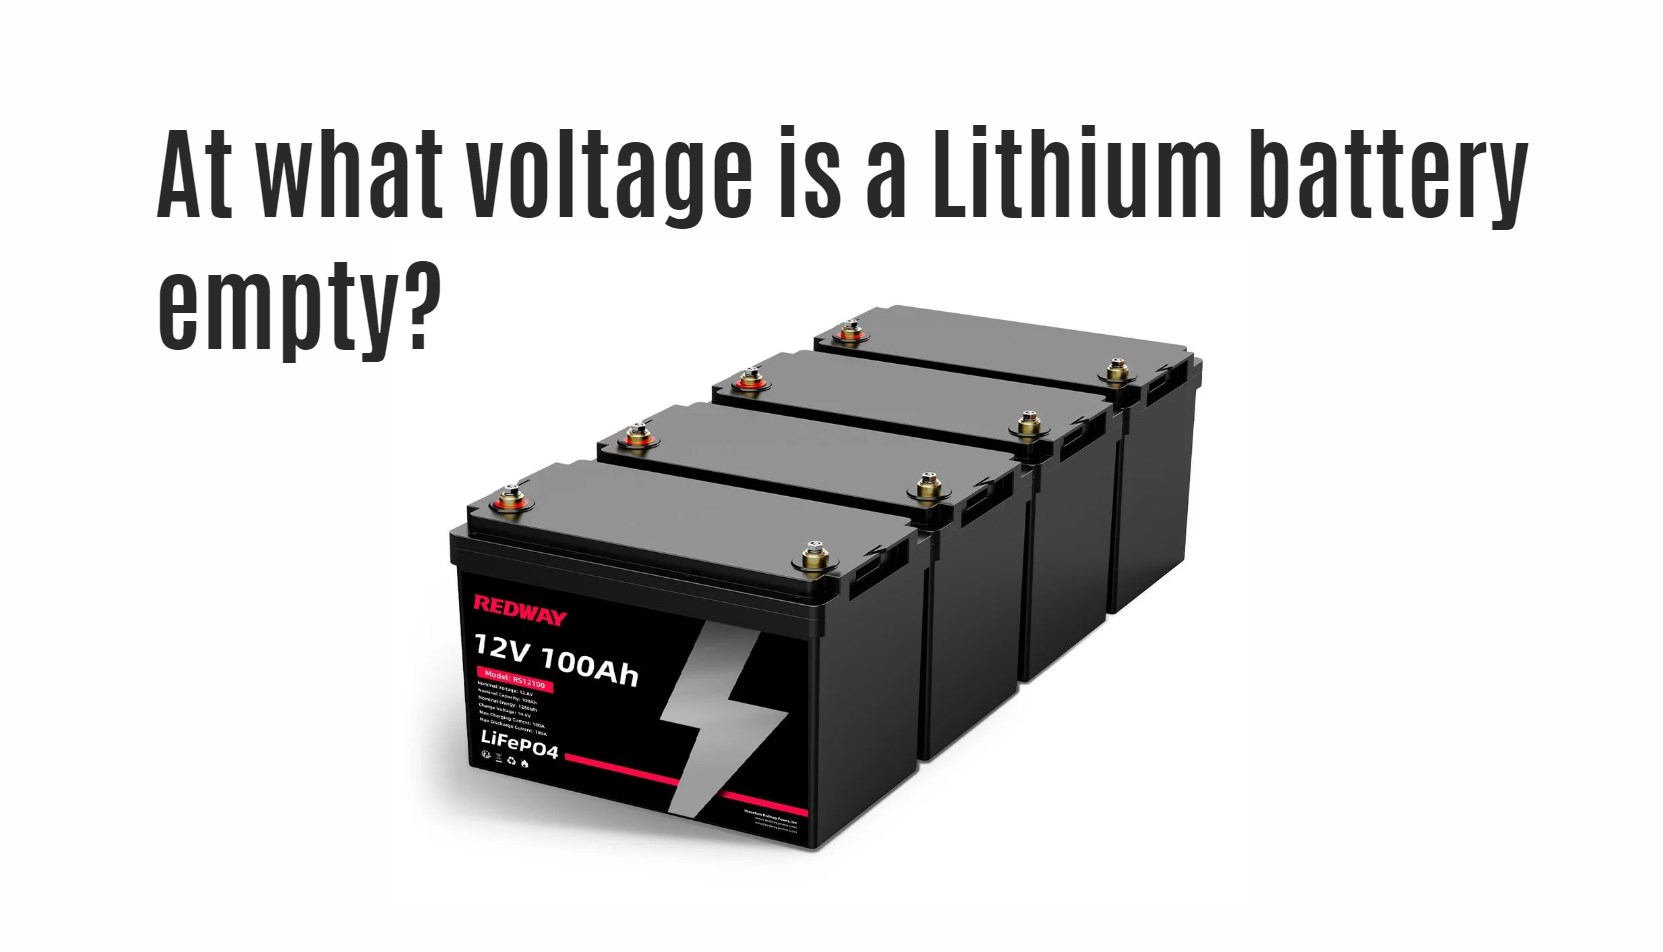 At what voltage is a Lithium battery empty?